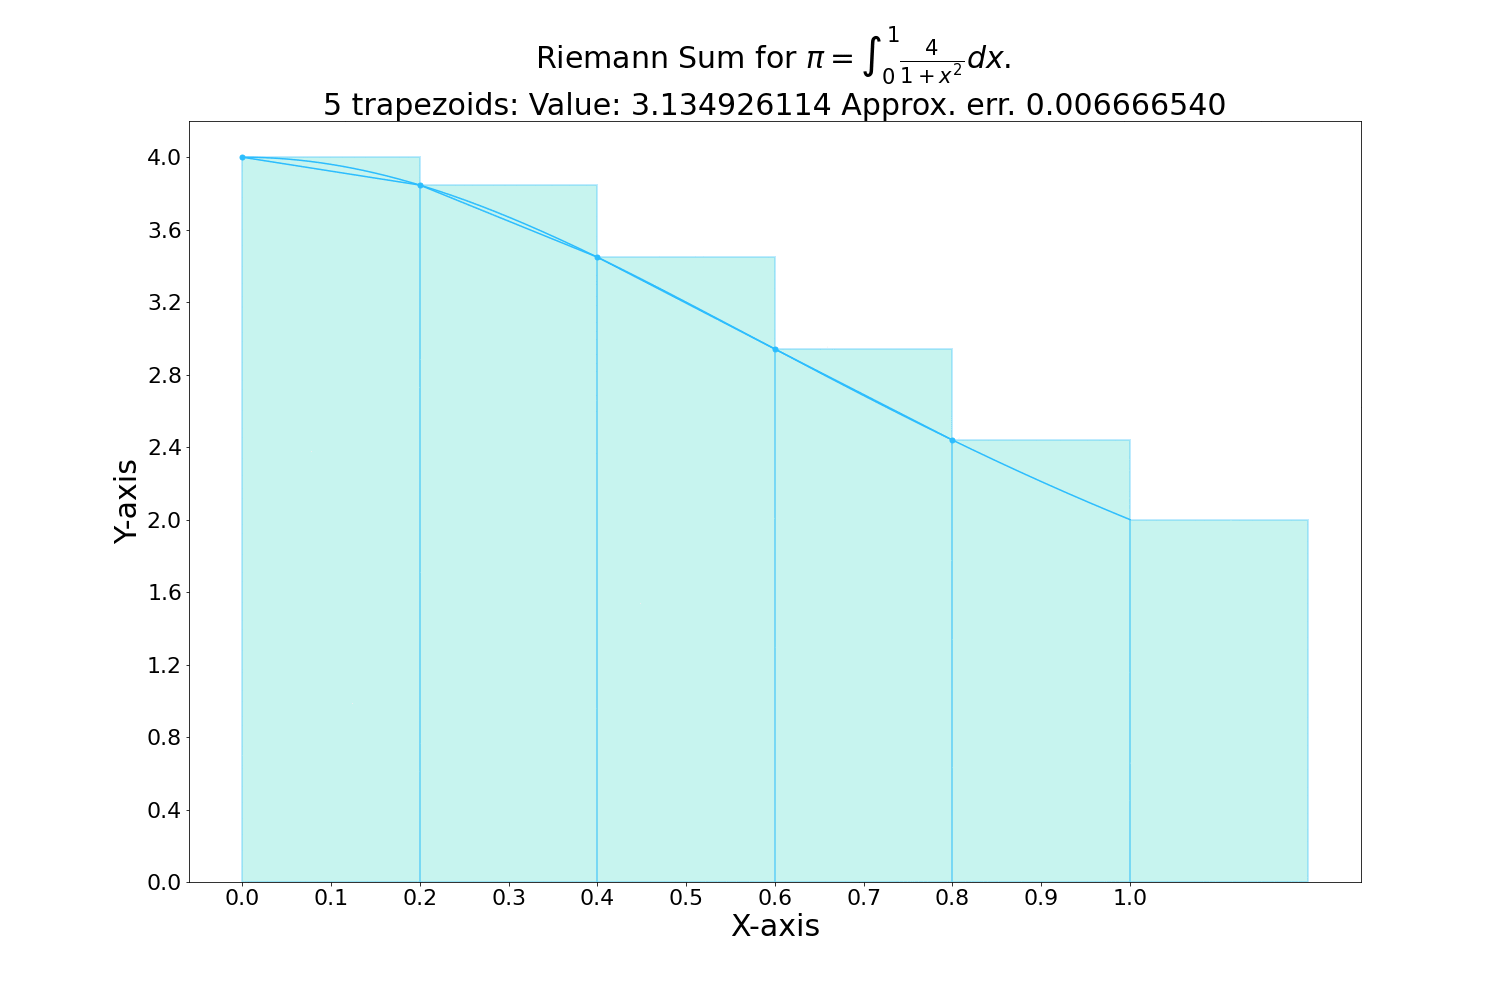 Integrals are Easy: Visualized Riemann Integration in Python | iSquared